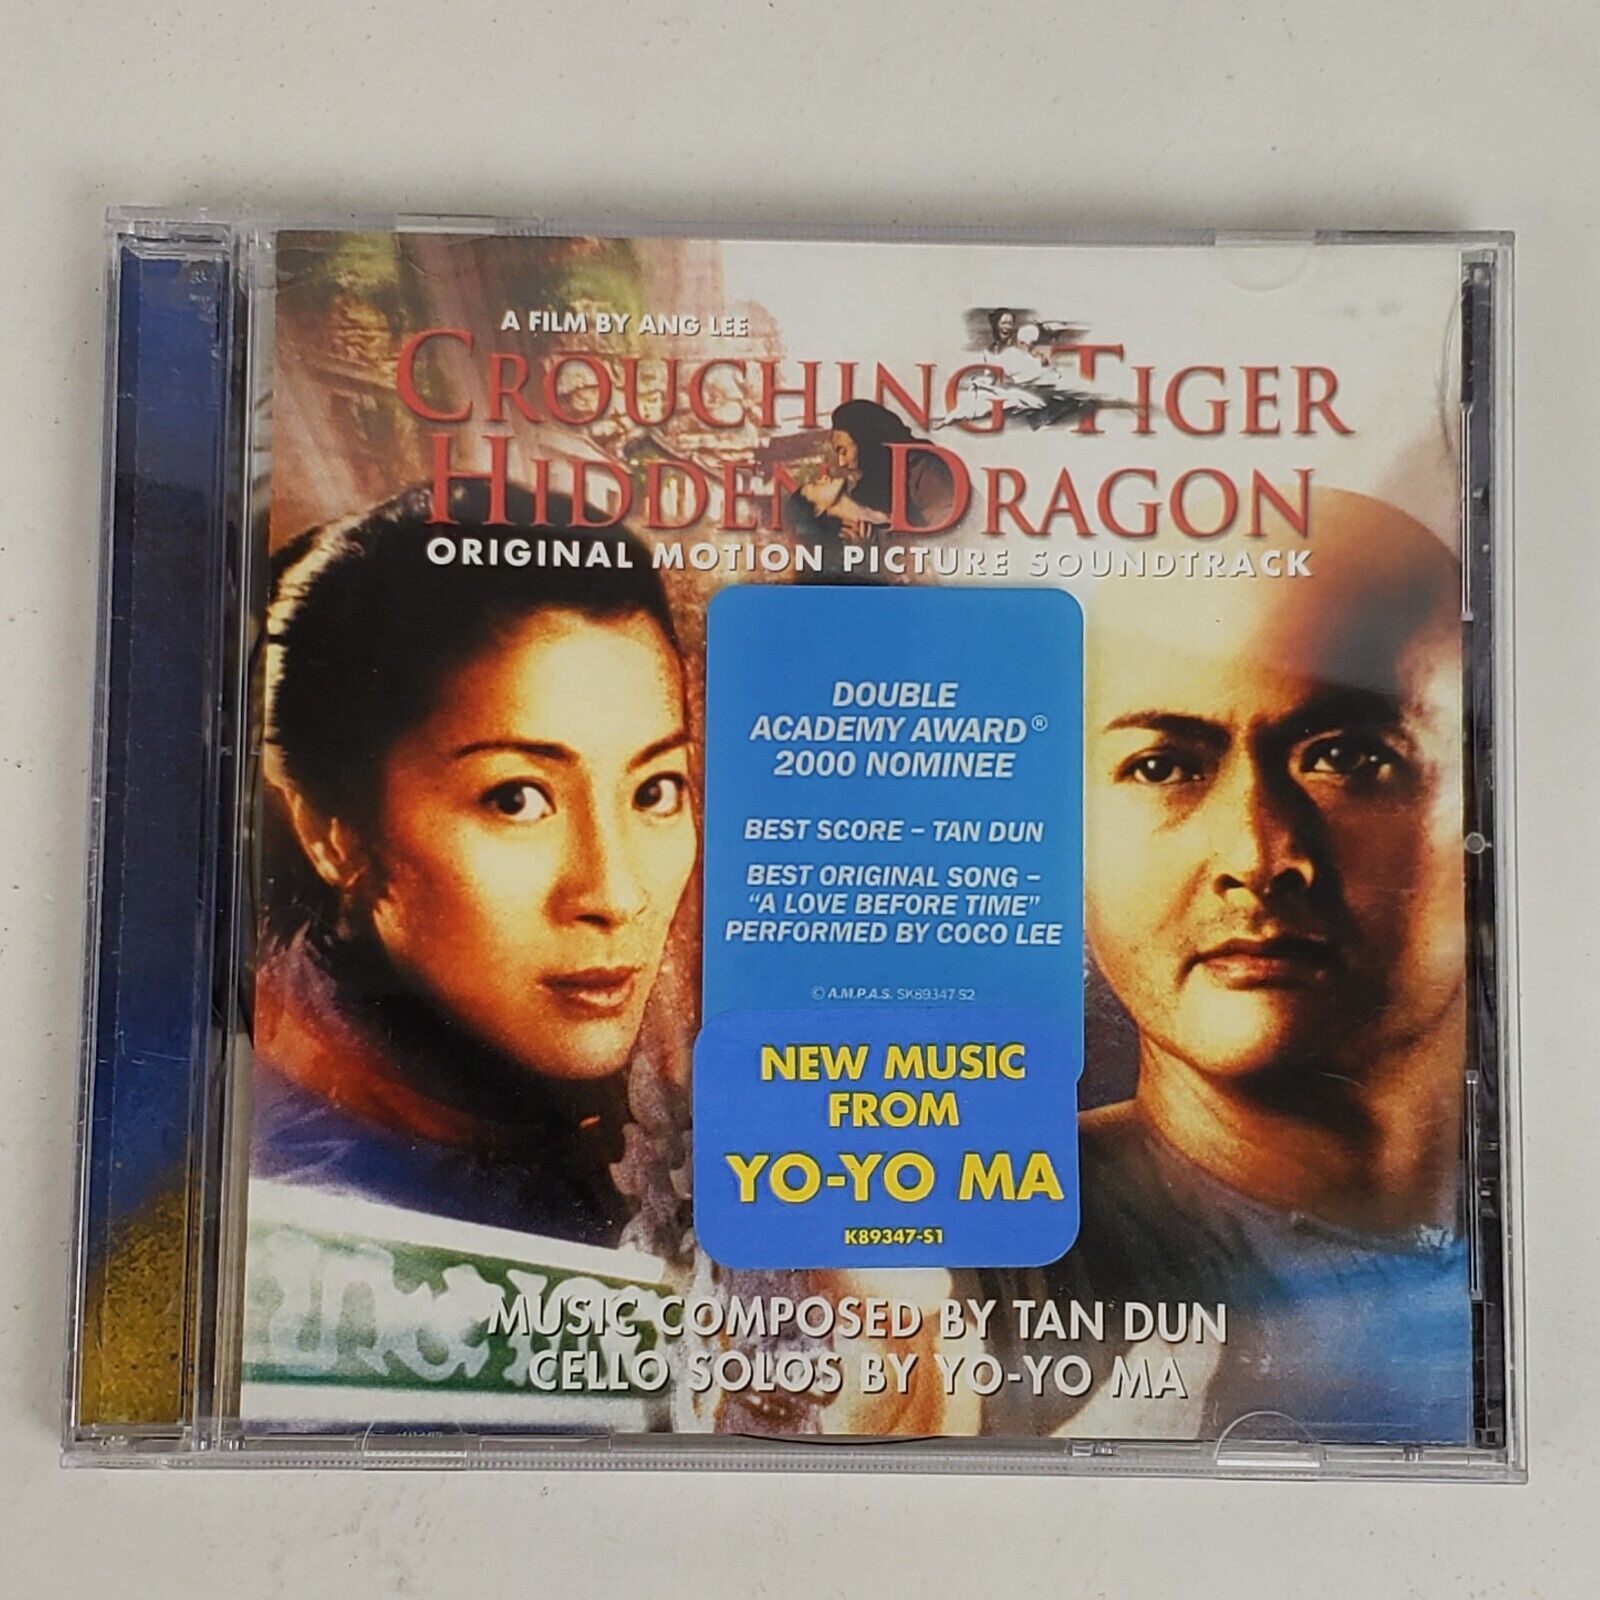 Vintage 2000 Crouching Tiger Hidden Dragon Motion Picture Soundtrack Music CD